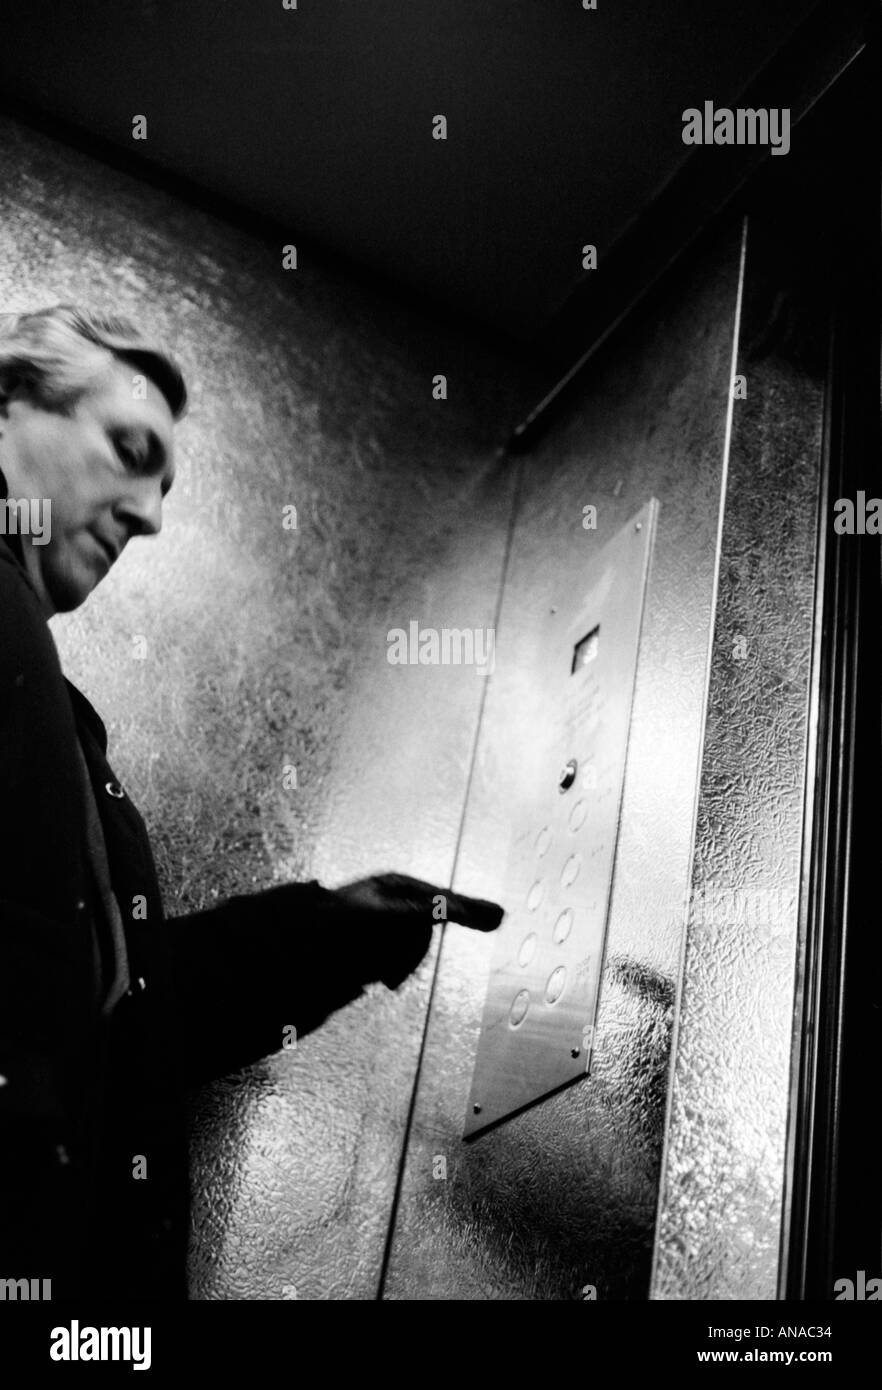 man in lift pressing a button shot in black and white Stock Photo